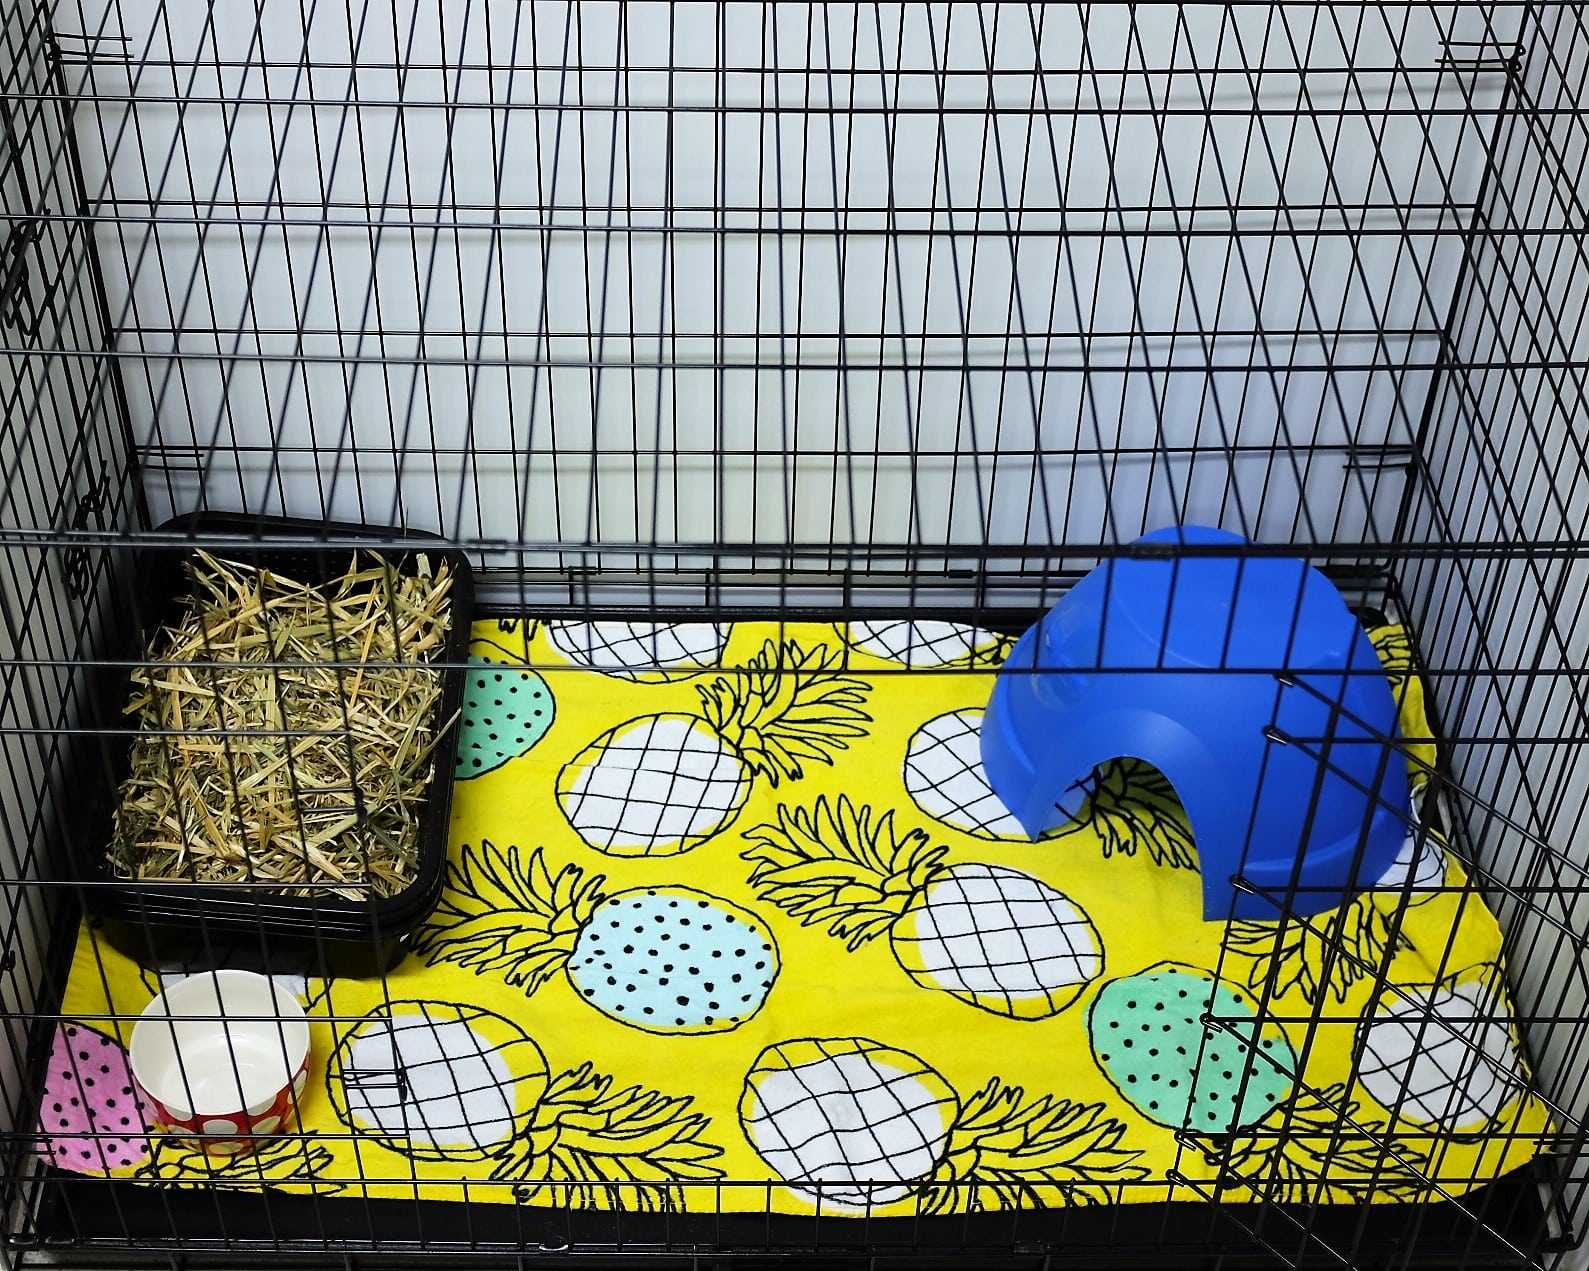 Comfy bunny cage accommodation at our rabbit boarding hotel in Melbourne